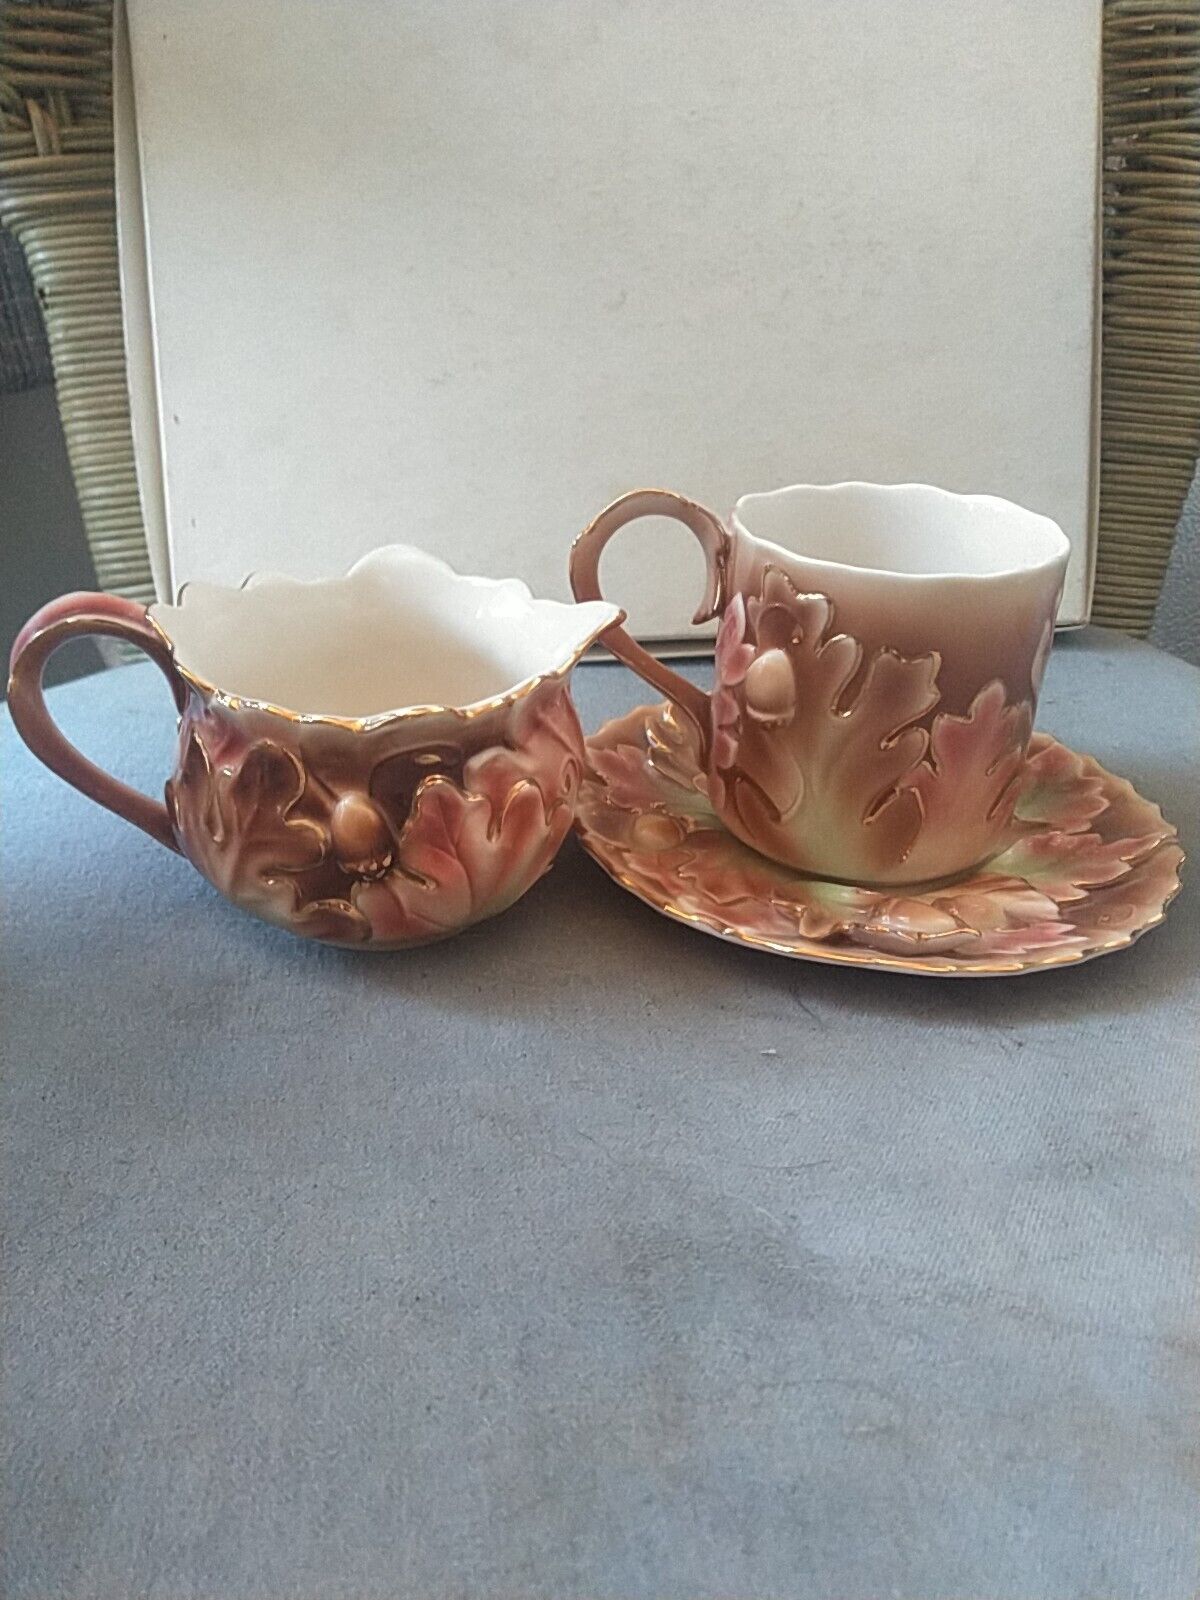 Franz Teacup Saucer And Creamer Set Leaves And Acorns Nice Fall Pattern